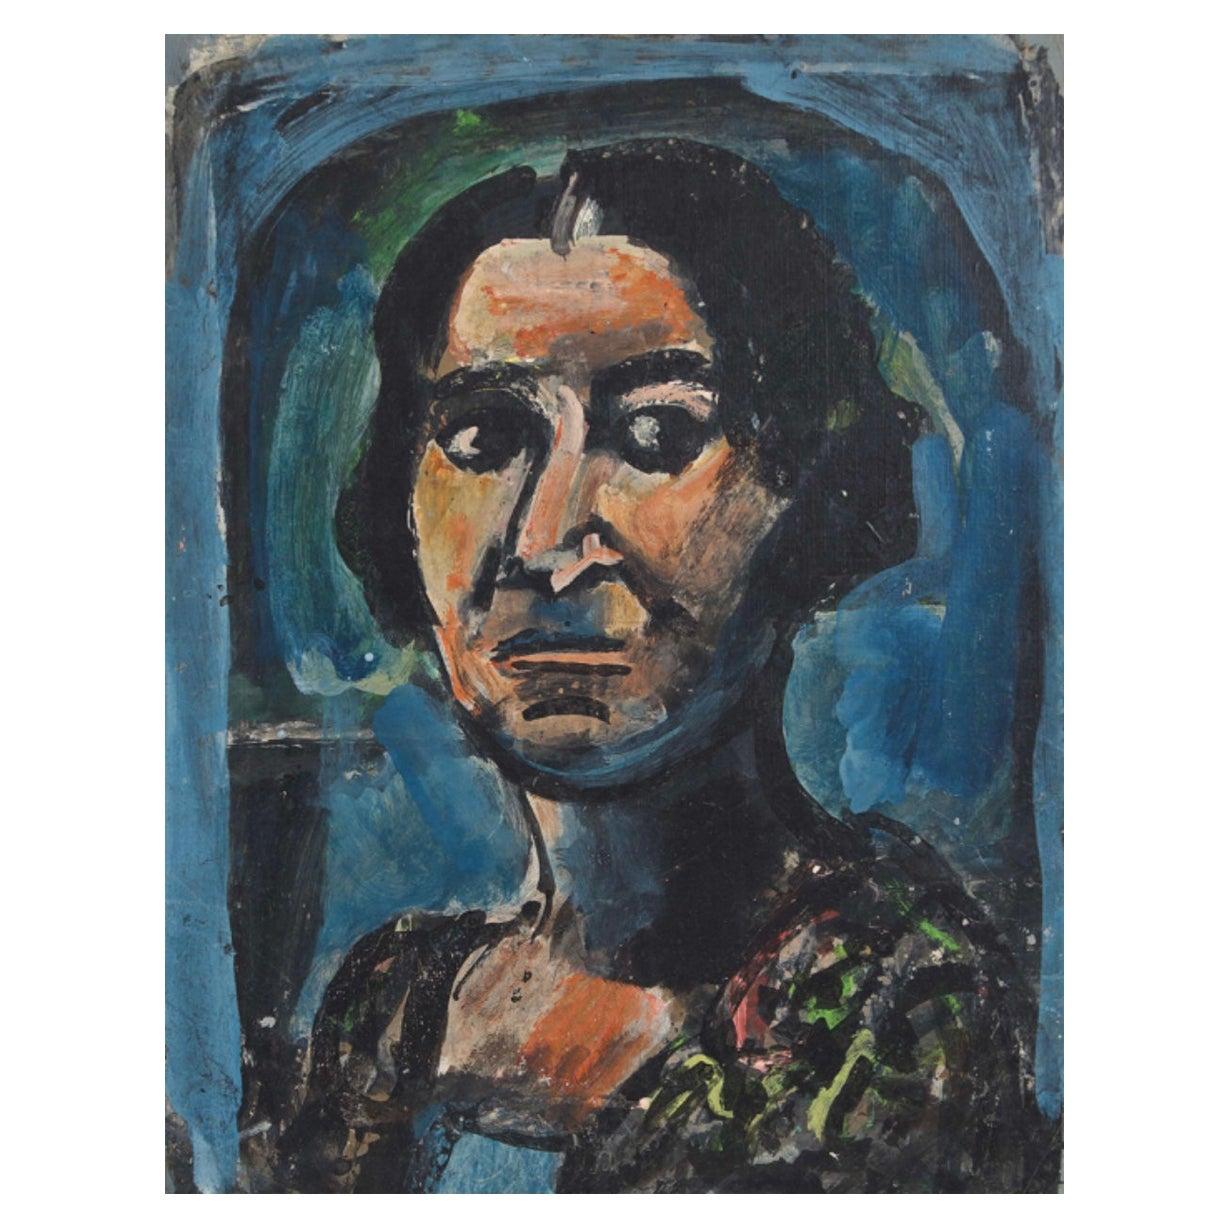 Georges Rouault (French, 1871-1958) - Étude pour le Portrait de Marie Thérèse Bonney. A large specimen painting for Rouault beautifully framed in a shadow fashion making a grandiose piece of art.

Stamped with ‘Atelier de Georges Rouault' and signed